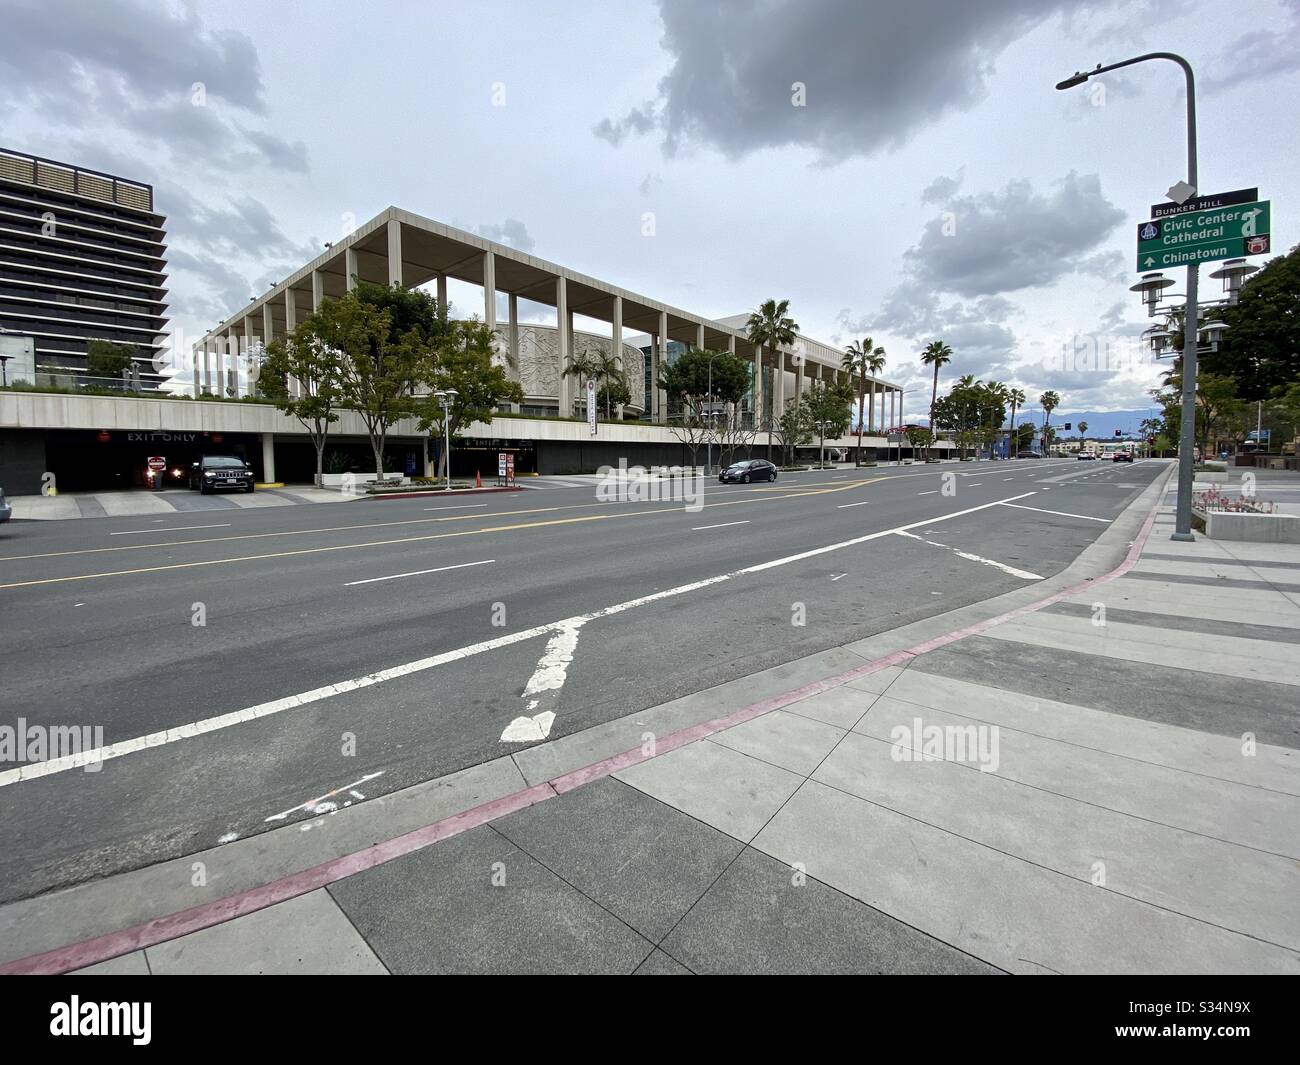 LOS ANGELES, CA, MAR 2020: wide angle view of The Music Center in Downtown, with Mark Taper Auditorium and Ahmanson Theater on Grand Ave Stock Photo